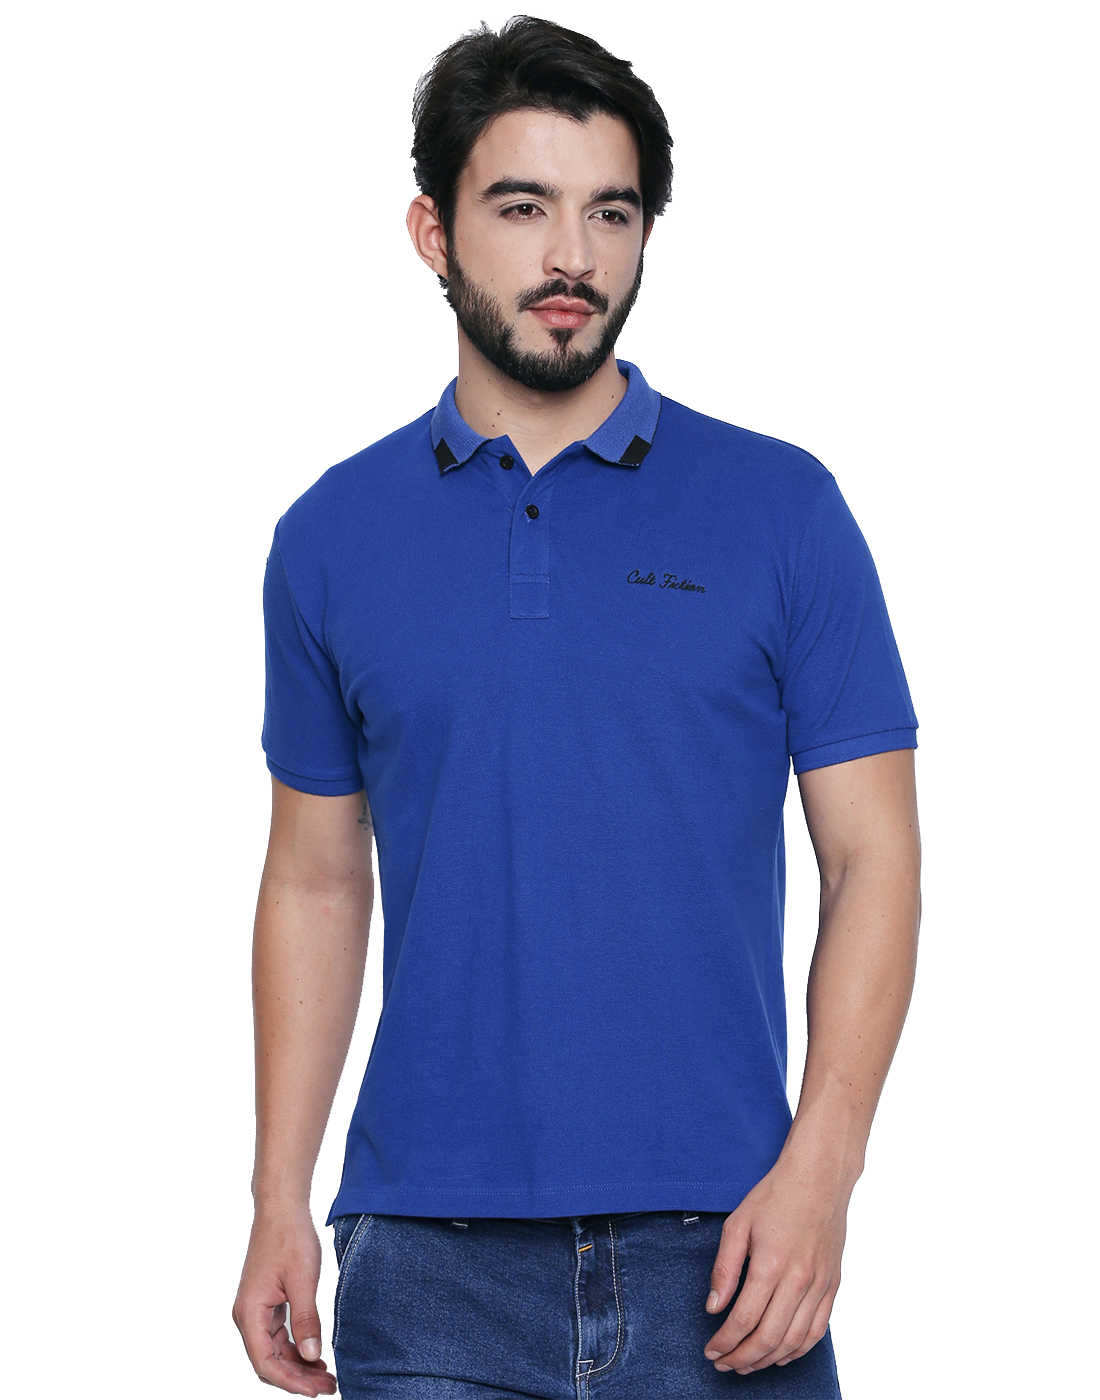 Buy Cult Fiction Polo Neck Royal Blue Embroidered 100 Cotton Pique ...